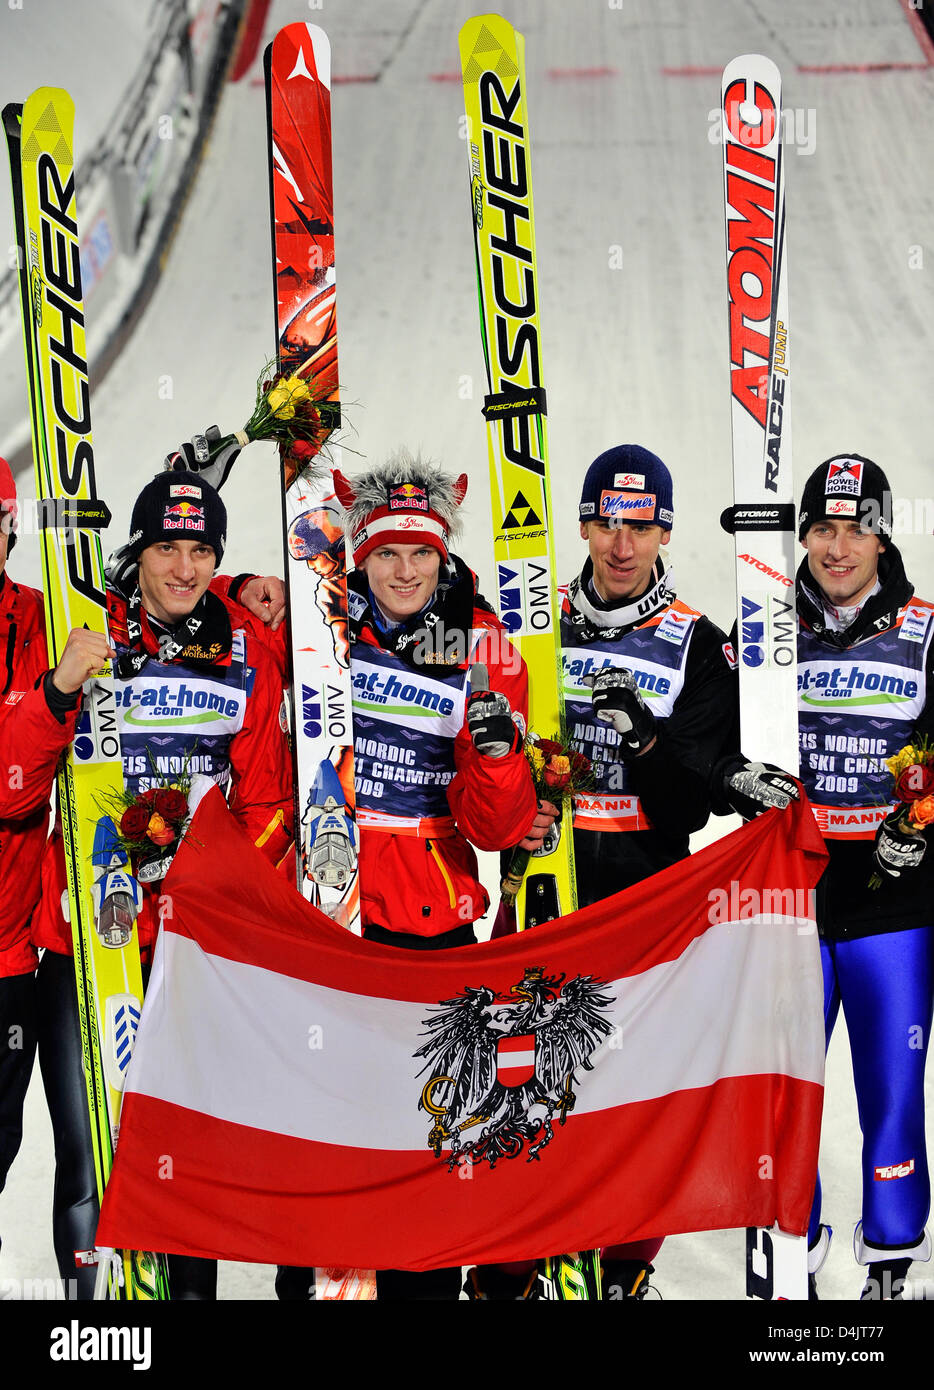 Austria?s ski jumpers Gregor Schlierenzauer (L-R), Thomas Morgenstern, Martin Koch and Wolfgang Loitzl jubilate after winning the team jumping competition at the FIS Nordic World Ski Championships in Liberec, Czech Republic, 28 February 2009. Photo: GERO BRELOER Stock Photo